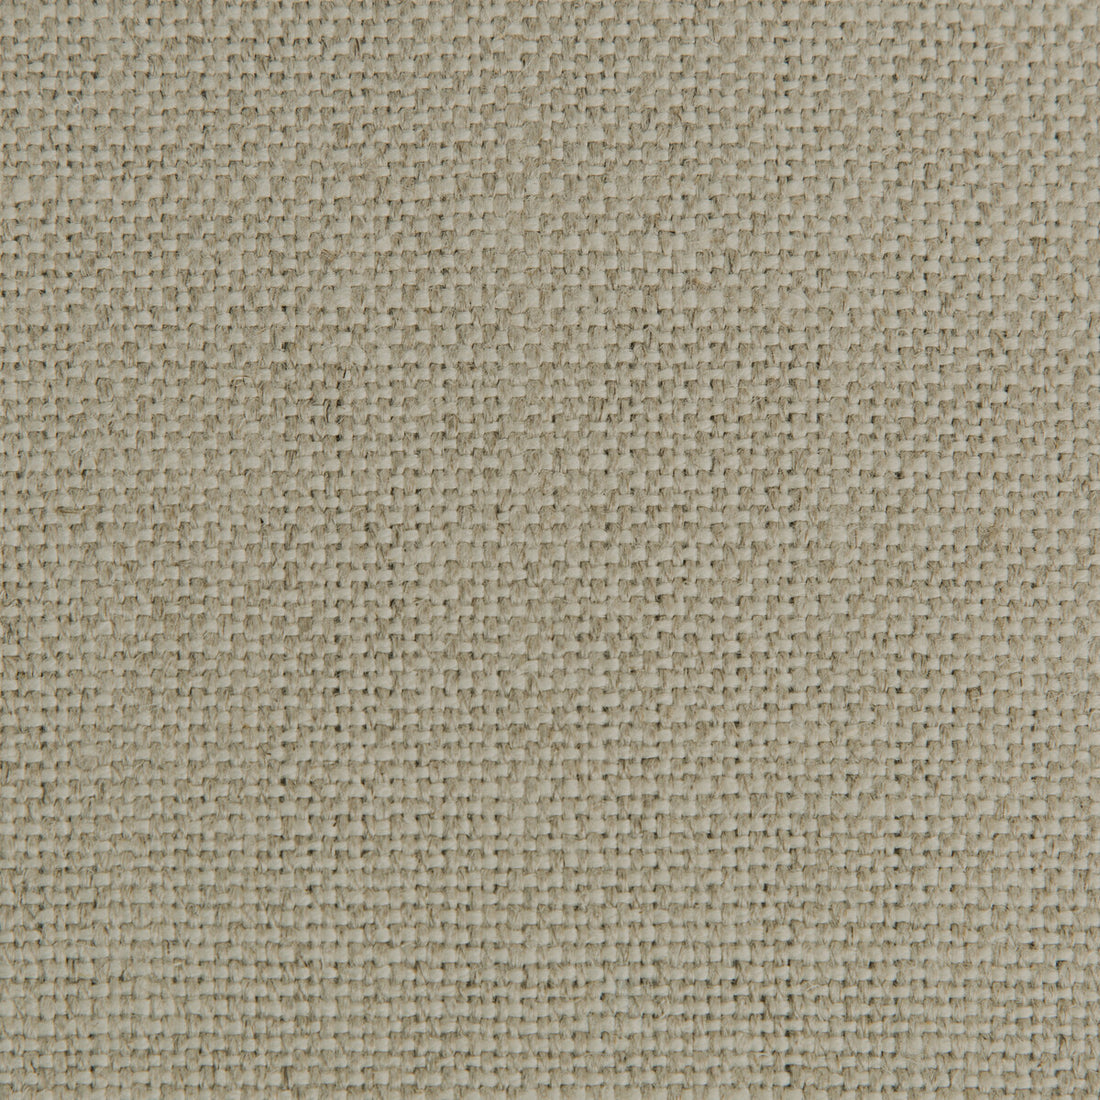 Adriano fabric in linen color - pattern PF50405.110.0 - by Baker Lifestyle in the Jeffrey Alan Marks collection